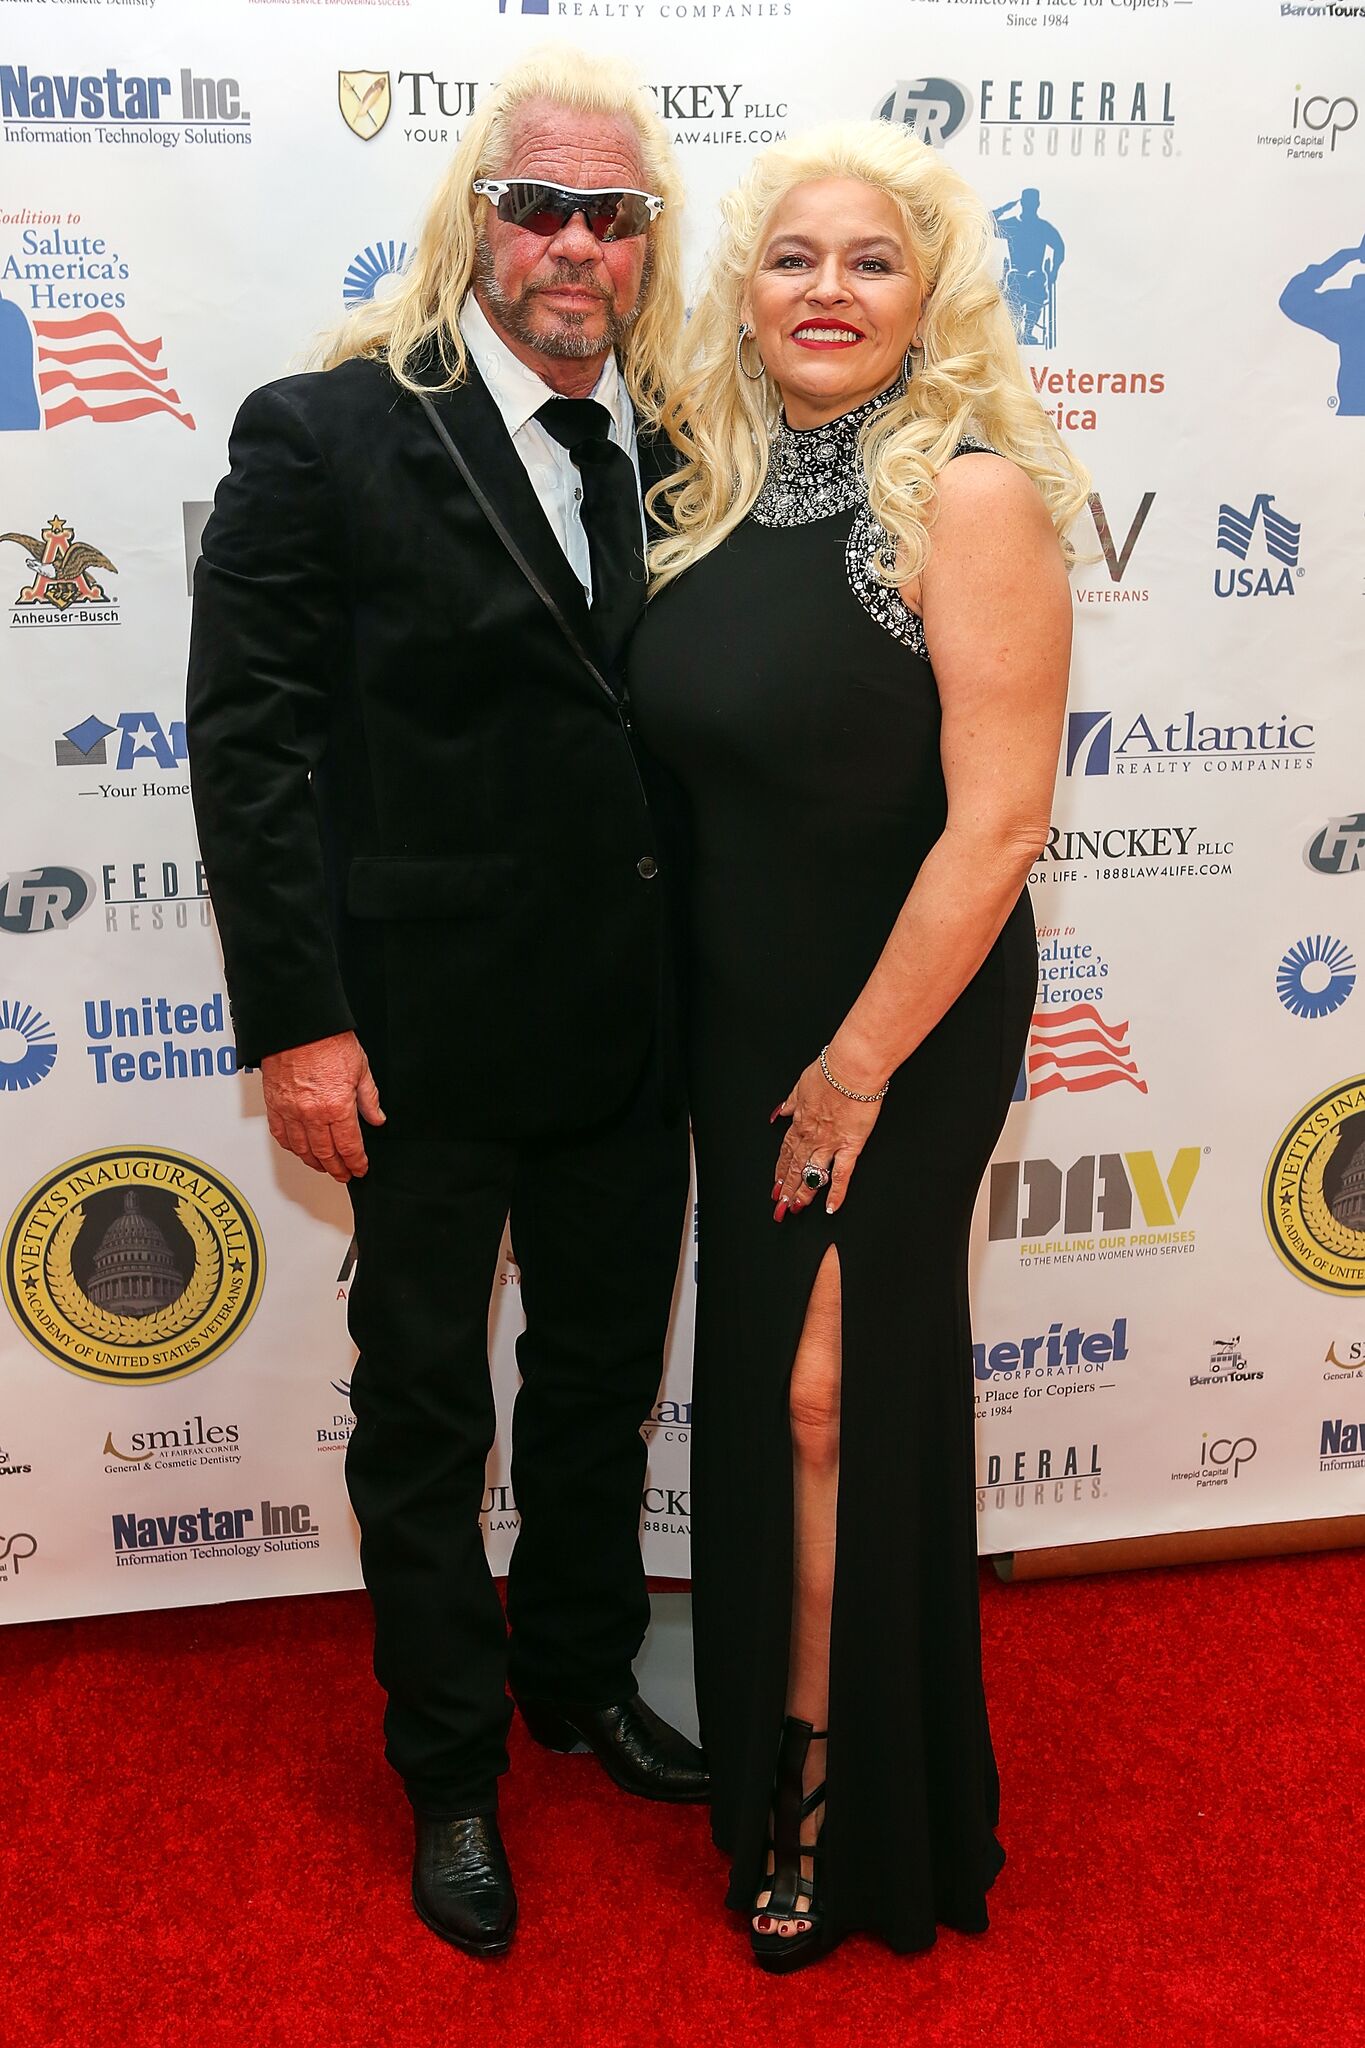 uane 'Dog the Bounty Hunter" Chapman and Beth Chapman attend the Vettys Presidential Inaugural Ball | Getty Images 